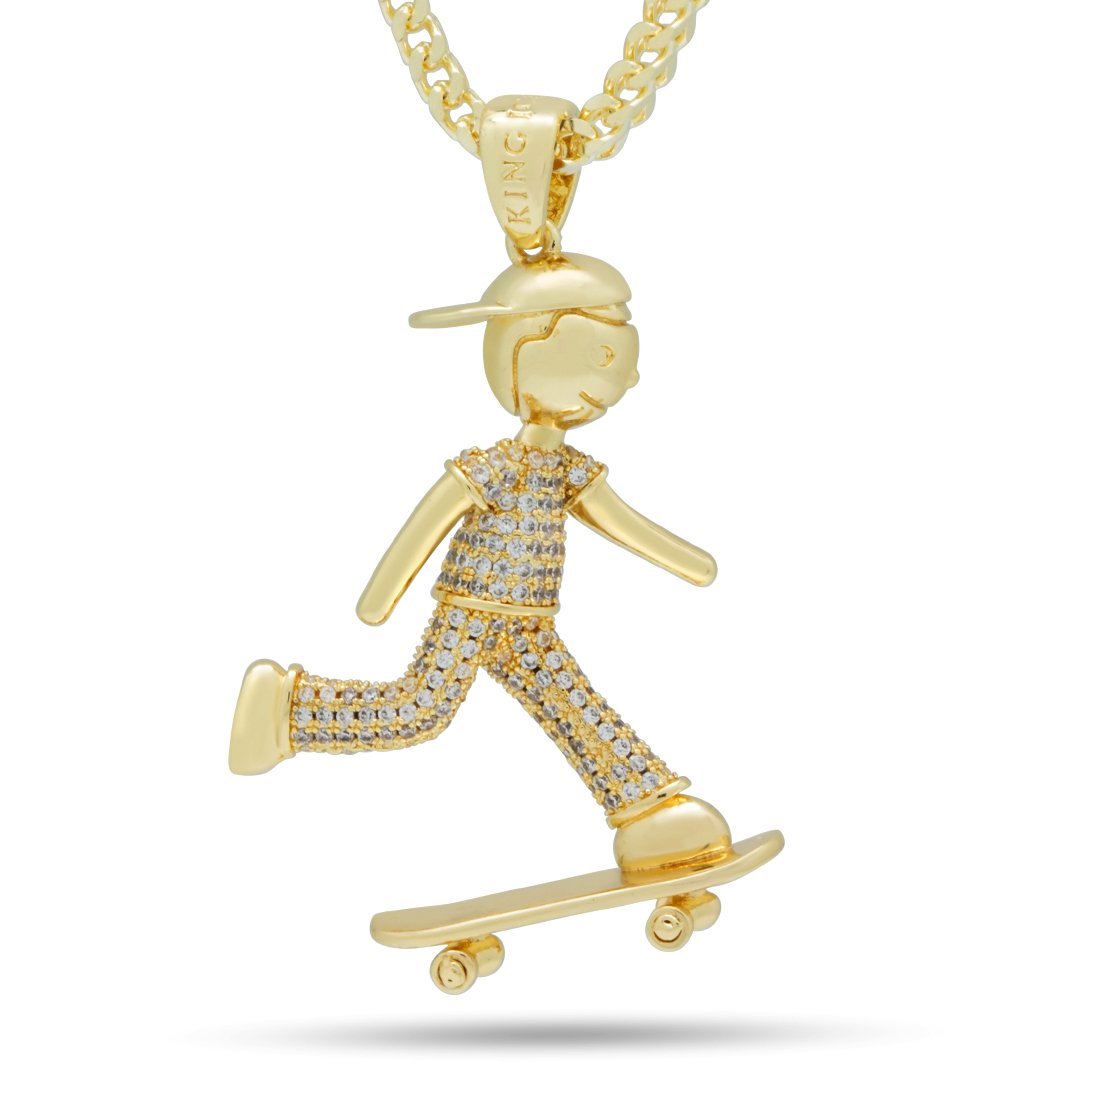 The Skate Life Necklace 14K Gold / M